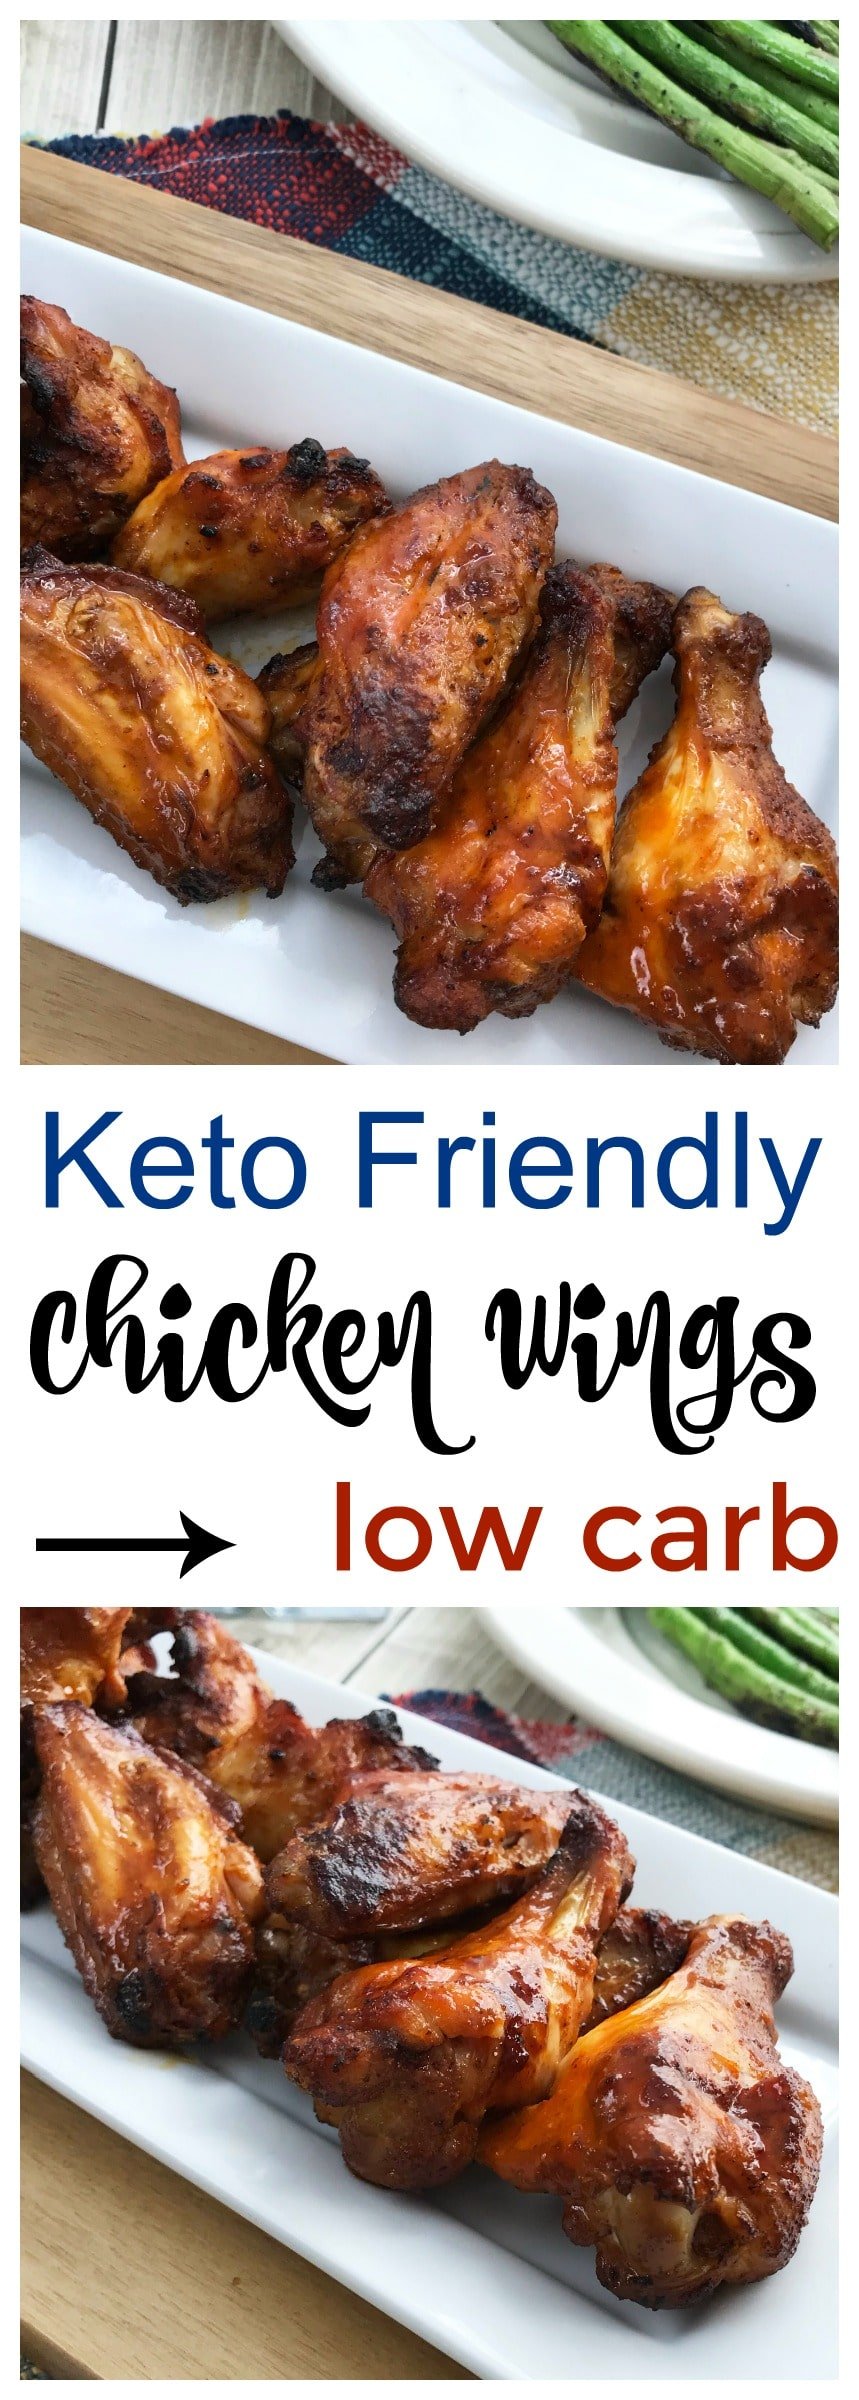 Keto Buffalo WIngs are a delicious chicken wing appetizer for your next party! These low carb chicken wings are easy, delicious, and a perfect treat at your next event. A great low carb appetizer recipe everyone enjoys!